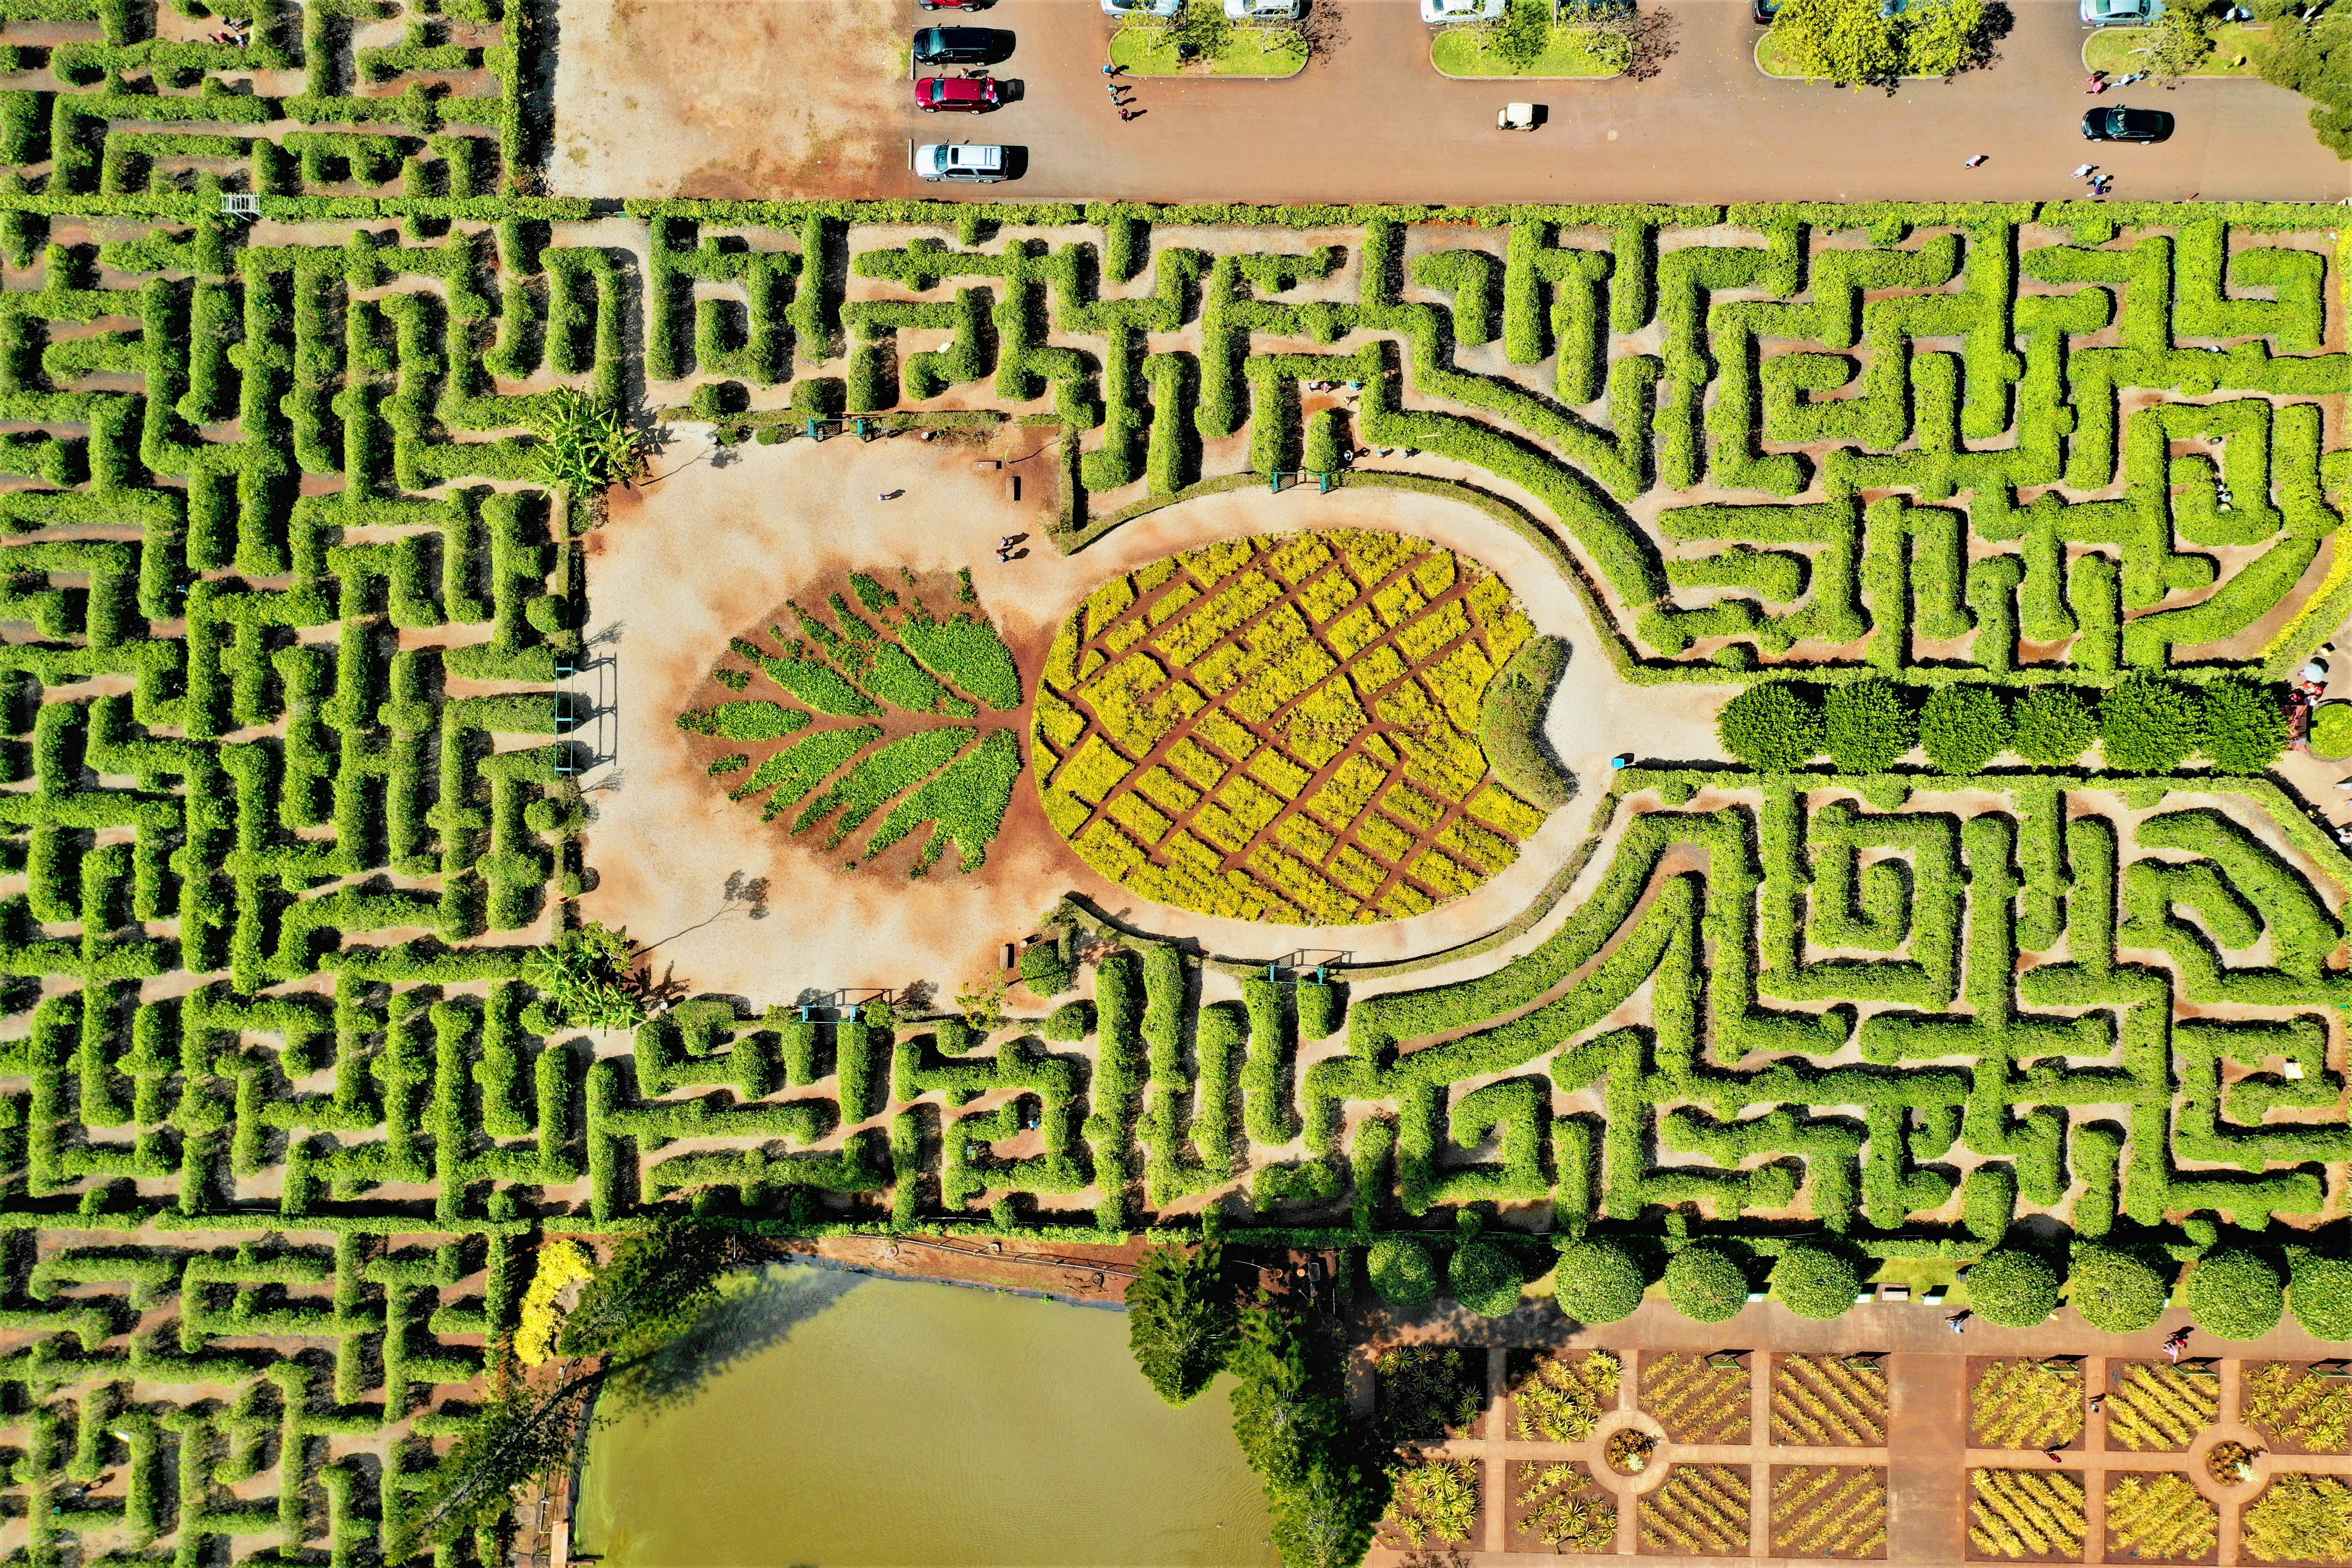 The Dole Plantation On Oahu Has A Pineapple Garden Maze That Ll Up